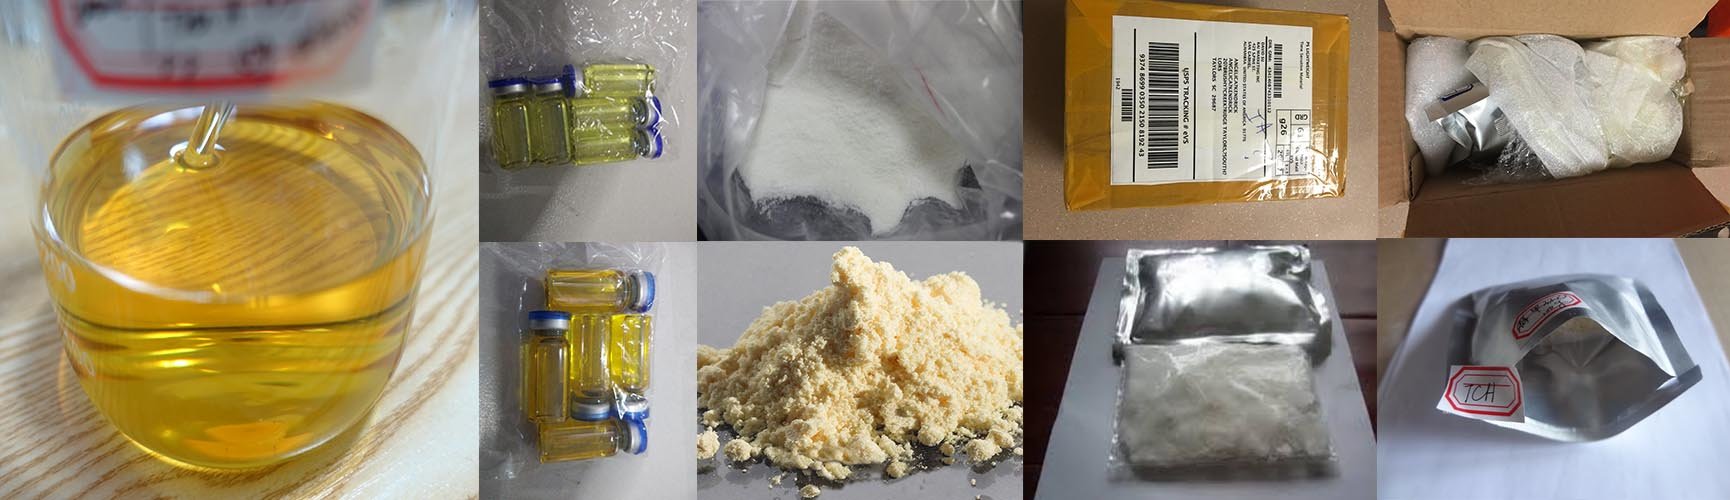 Buy Steroid Powder Canada Domestic Buy Steroid Powder US Domestic Buy Steroid Powder EU Domestic Buy Pure Steroid Powders Cheap Price UK msnpharma.com Offer High Quality Steroid Powders, Sarms powders, Prohormone Powders, Delivery Guarant